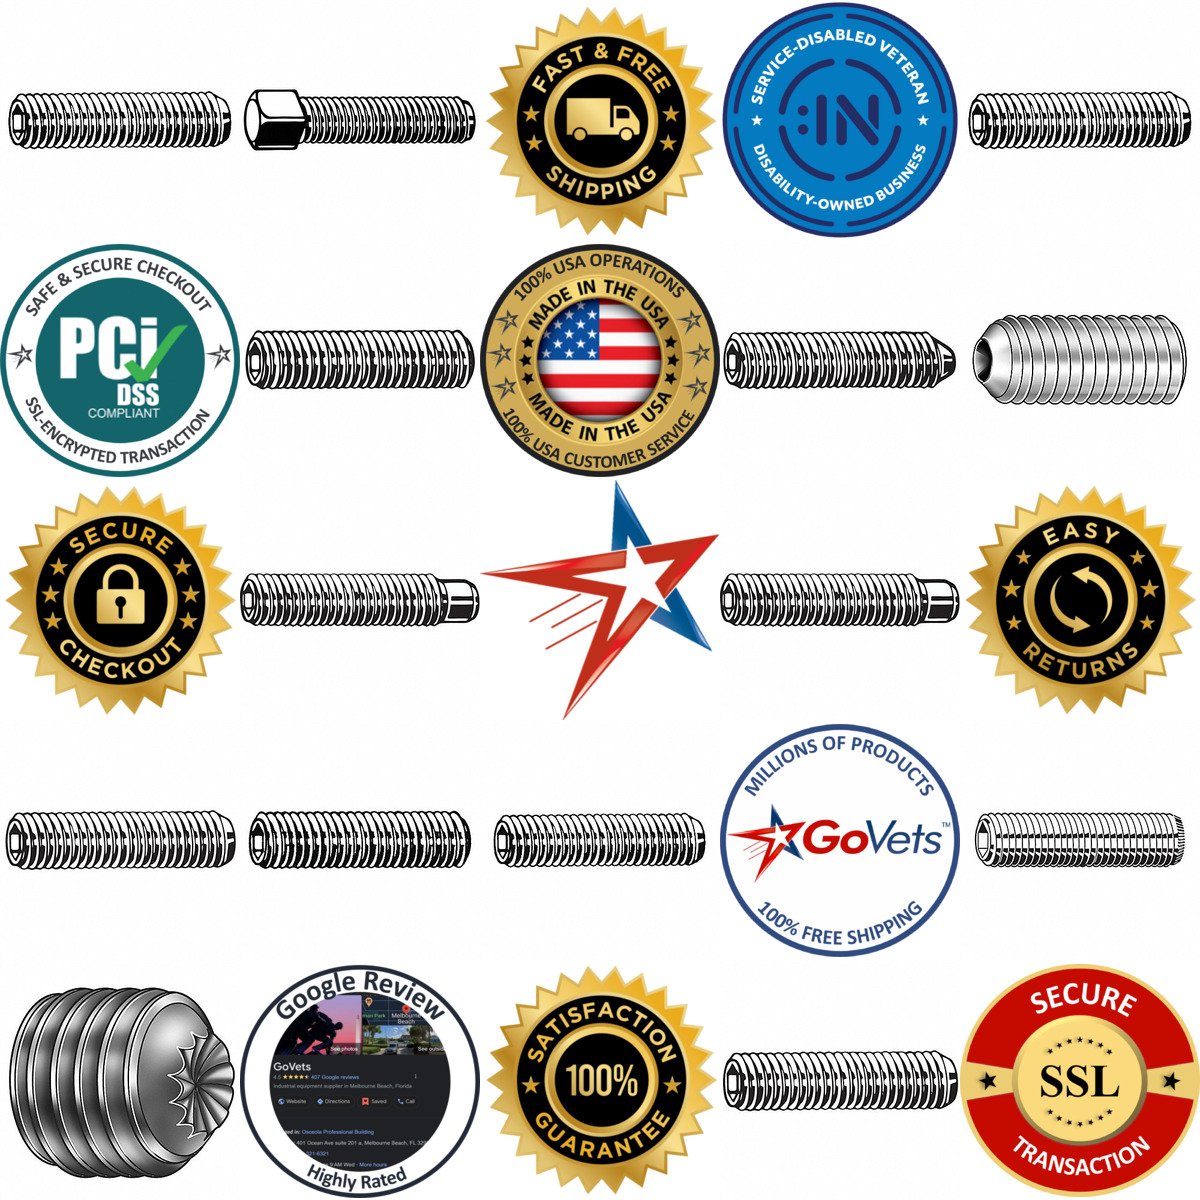 A selection of Socket Set Screws products on GoVets